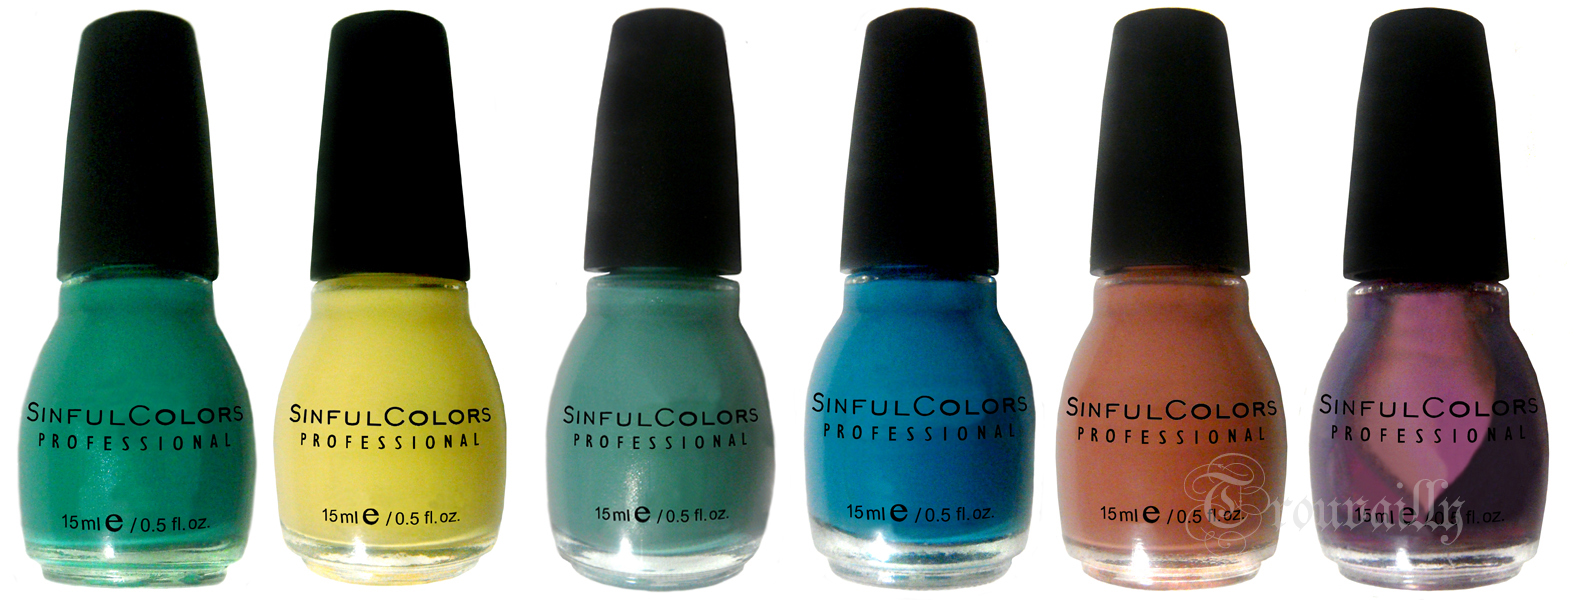 10. "First Love" Nail Polish by Sinful Colors - wide 1